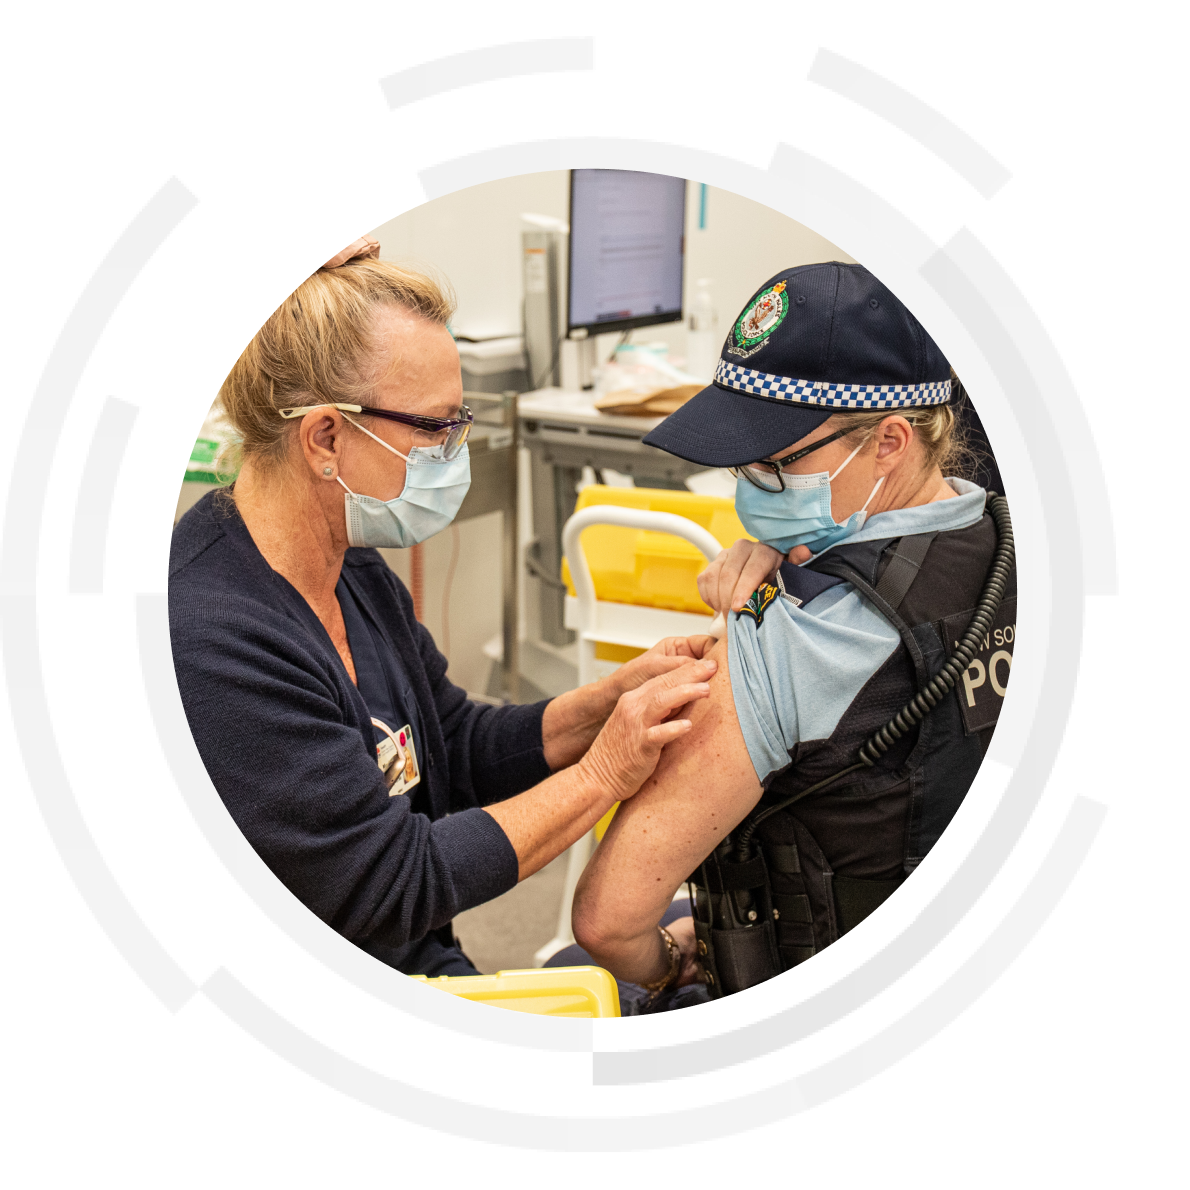 Nurse administering vaccination to a patient who is a female police officer.